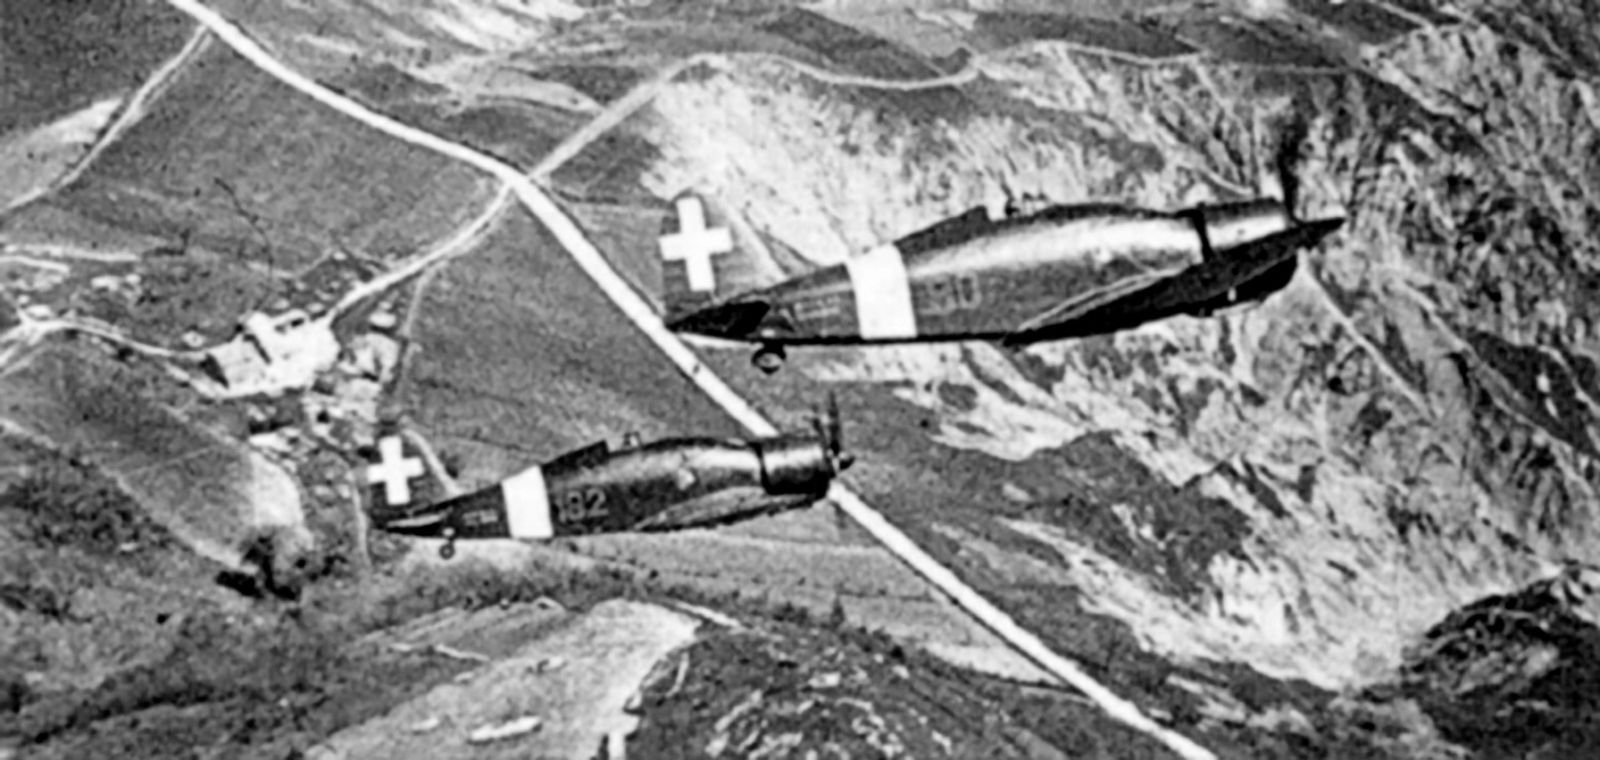 Fiat G.50 Freccia, "Red 90" and "Red 182" of an unknown training unit/ Gruppo Complementare, Italy-1942 (1)